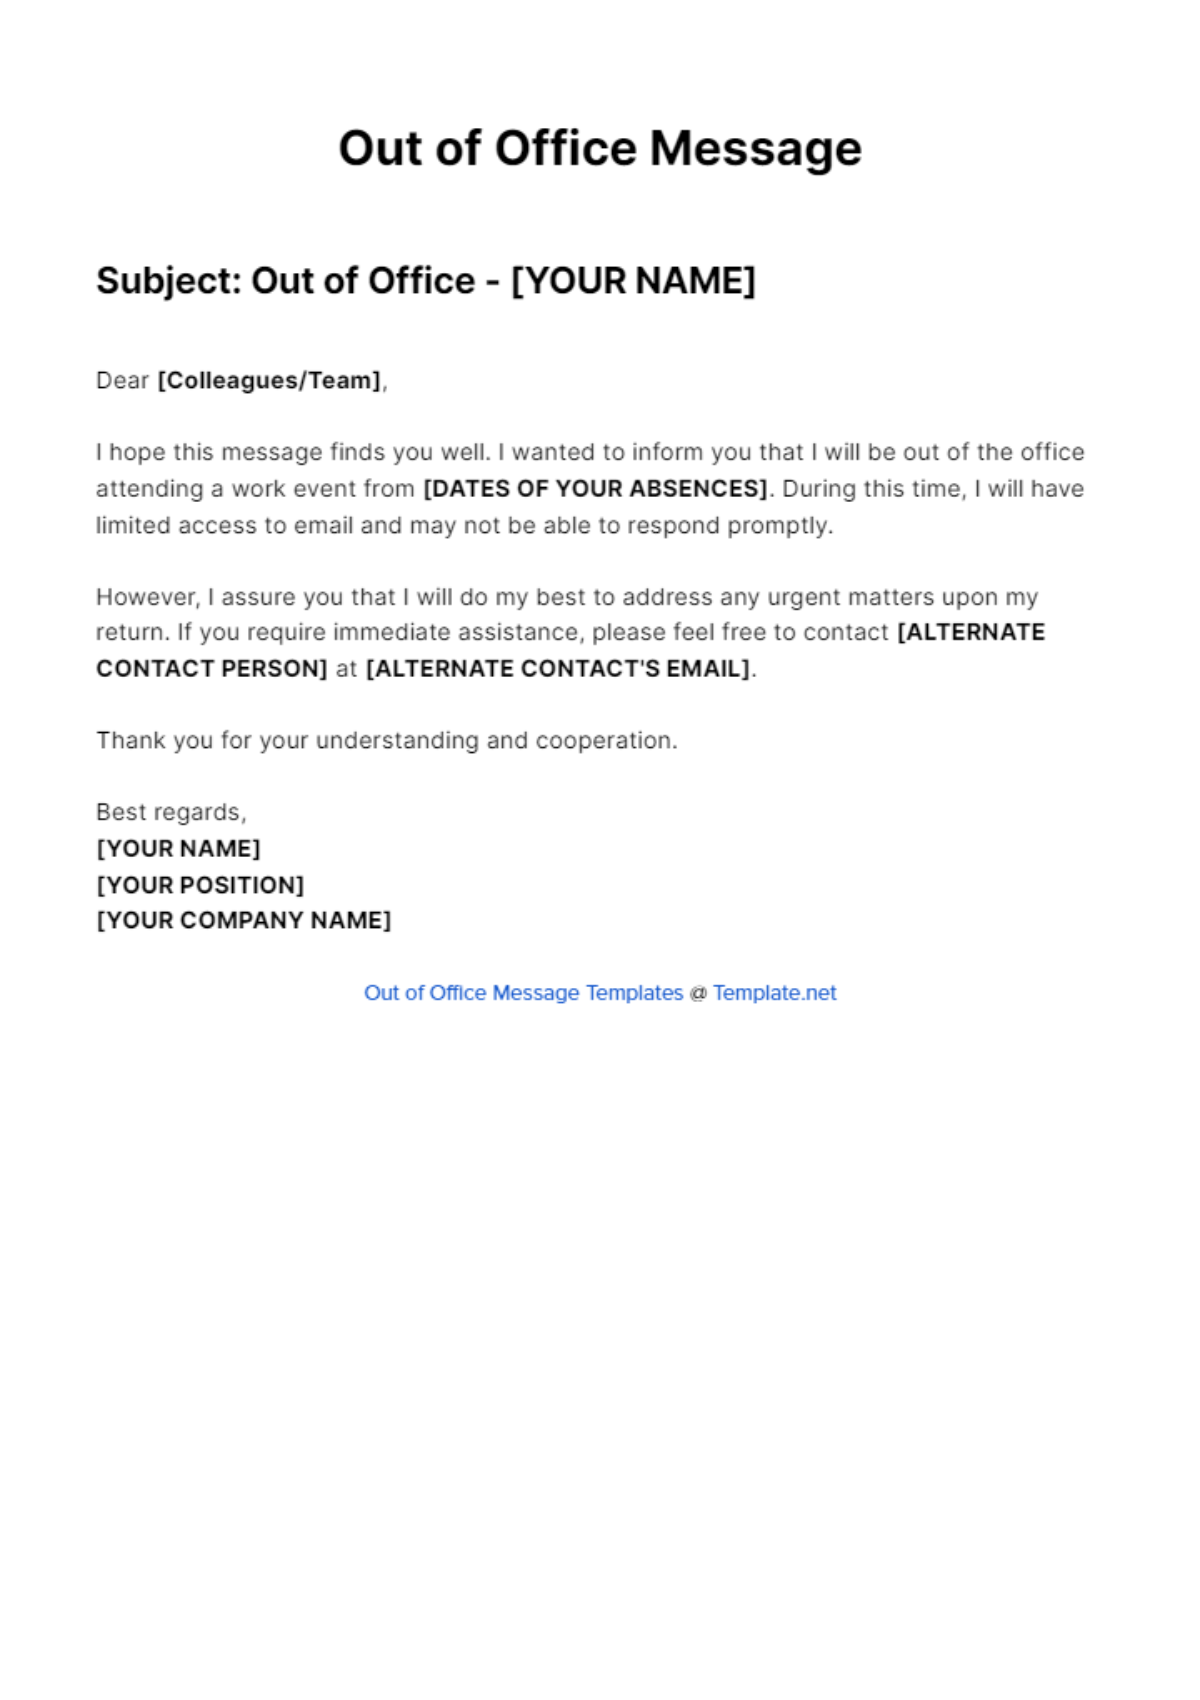 Out Of Office Message For Work Event Template